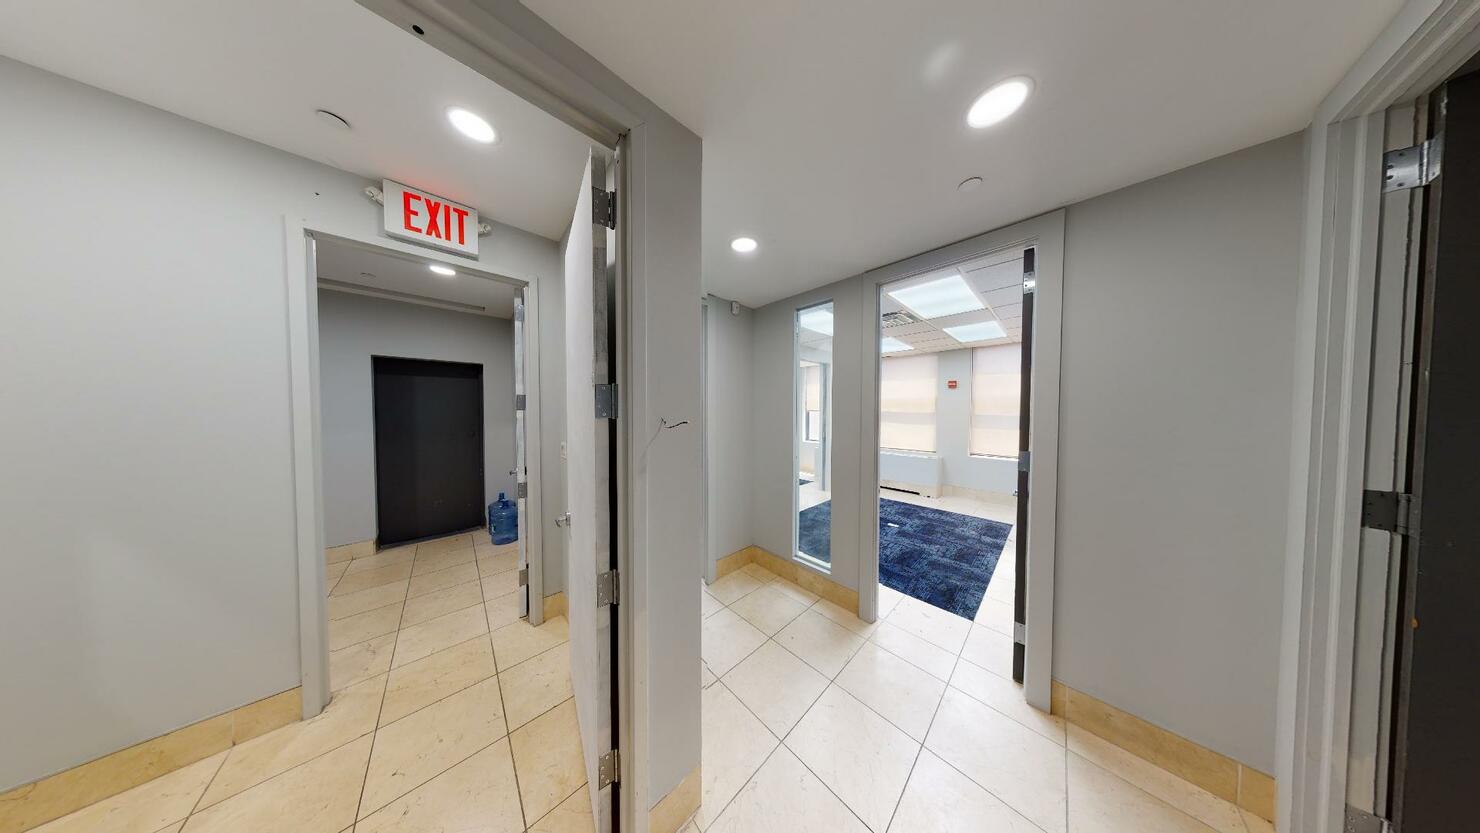 255 West 36th Street Office Space - Entrance and Hallway